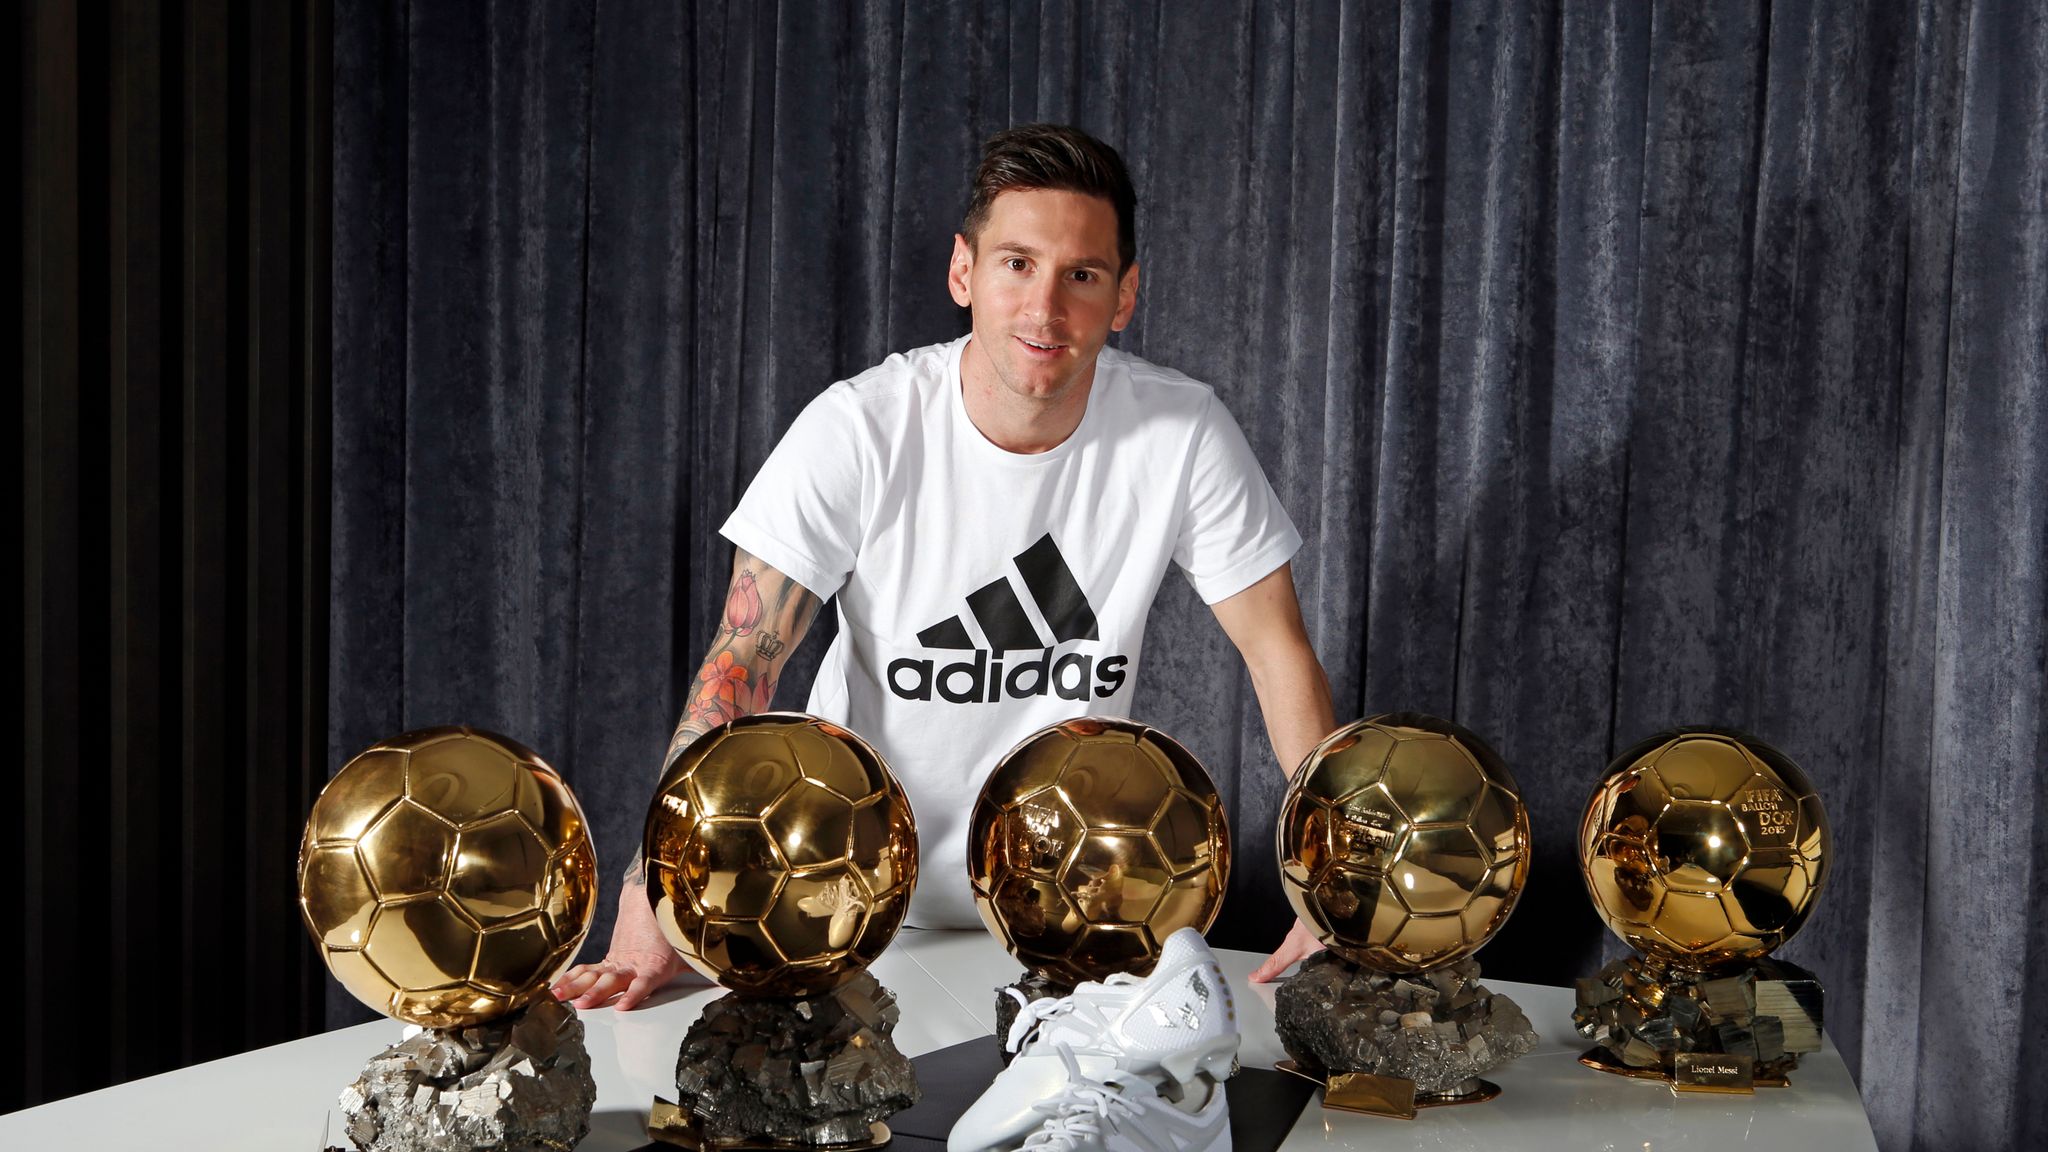 Five-time Ballon d'Or winner Messi platinum boot from adidas | Football News | Sports